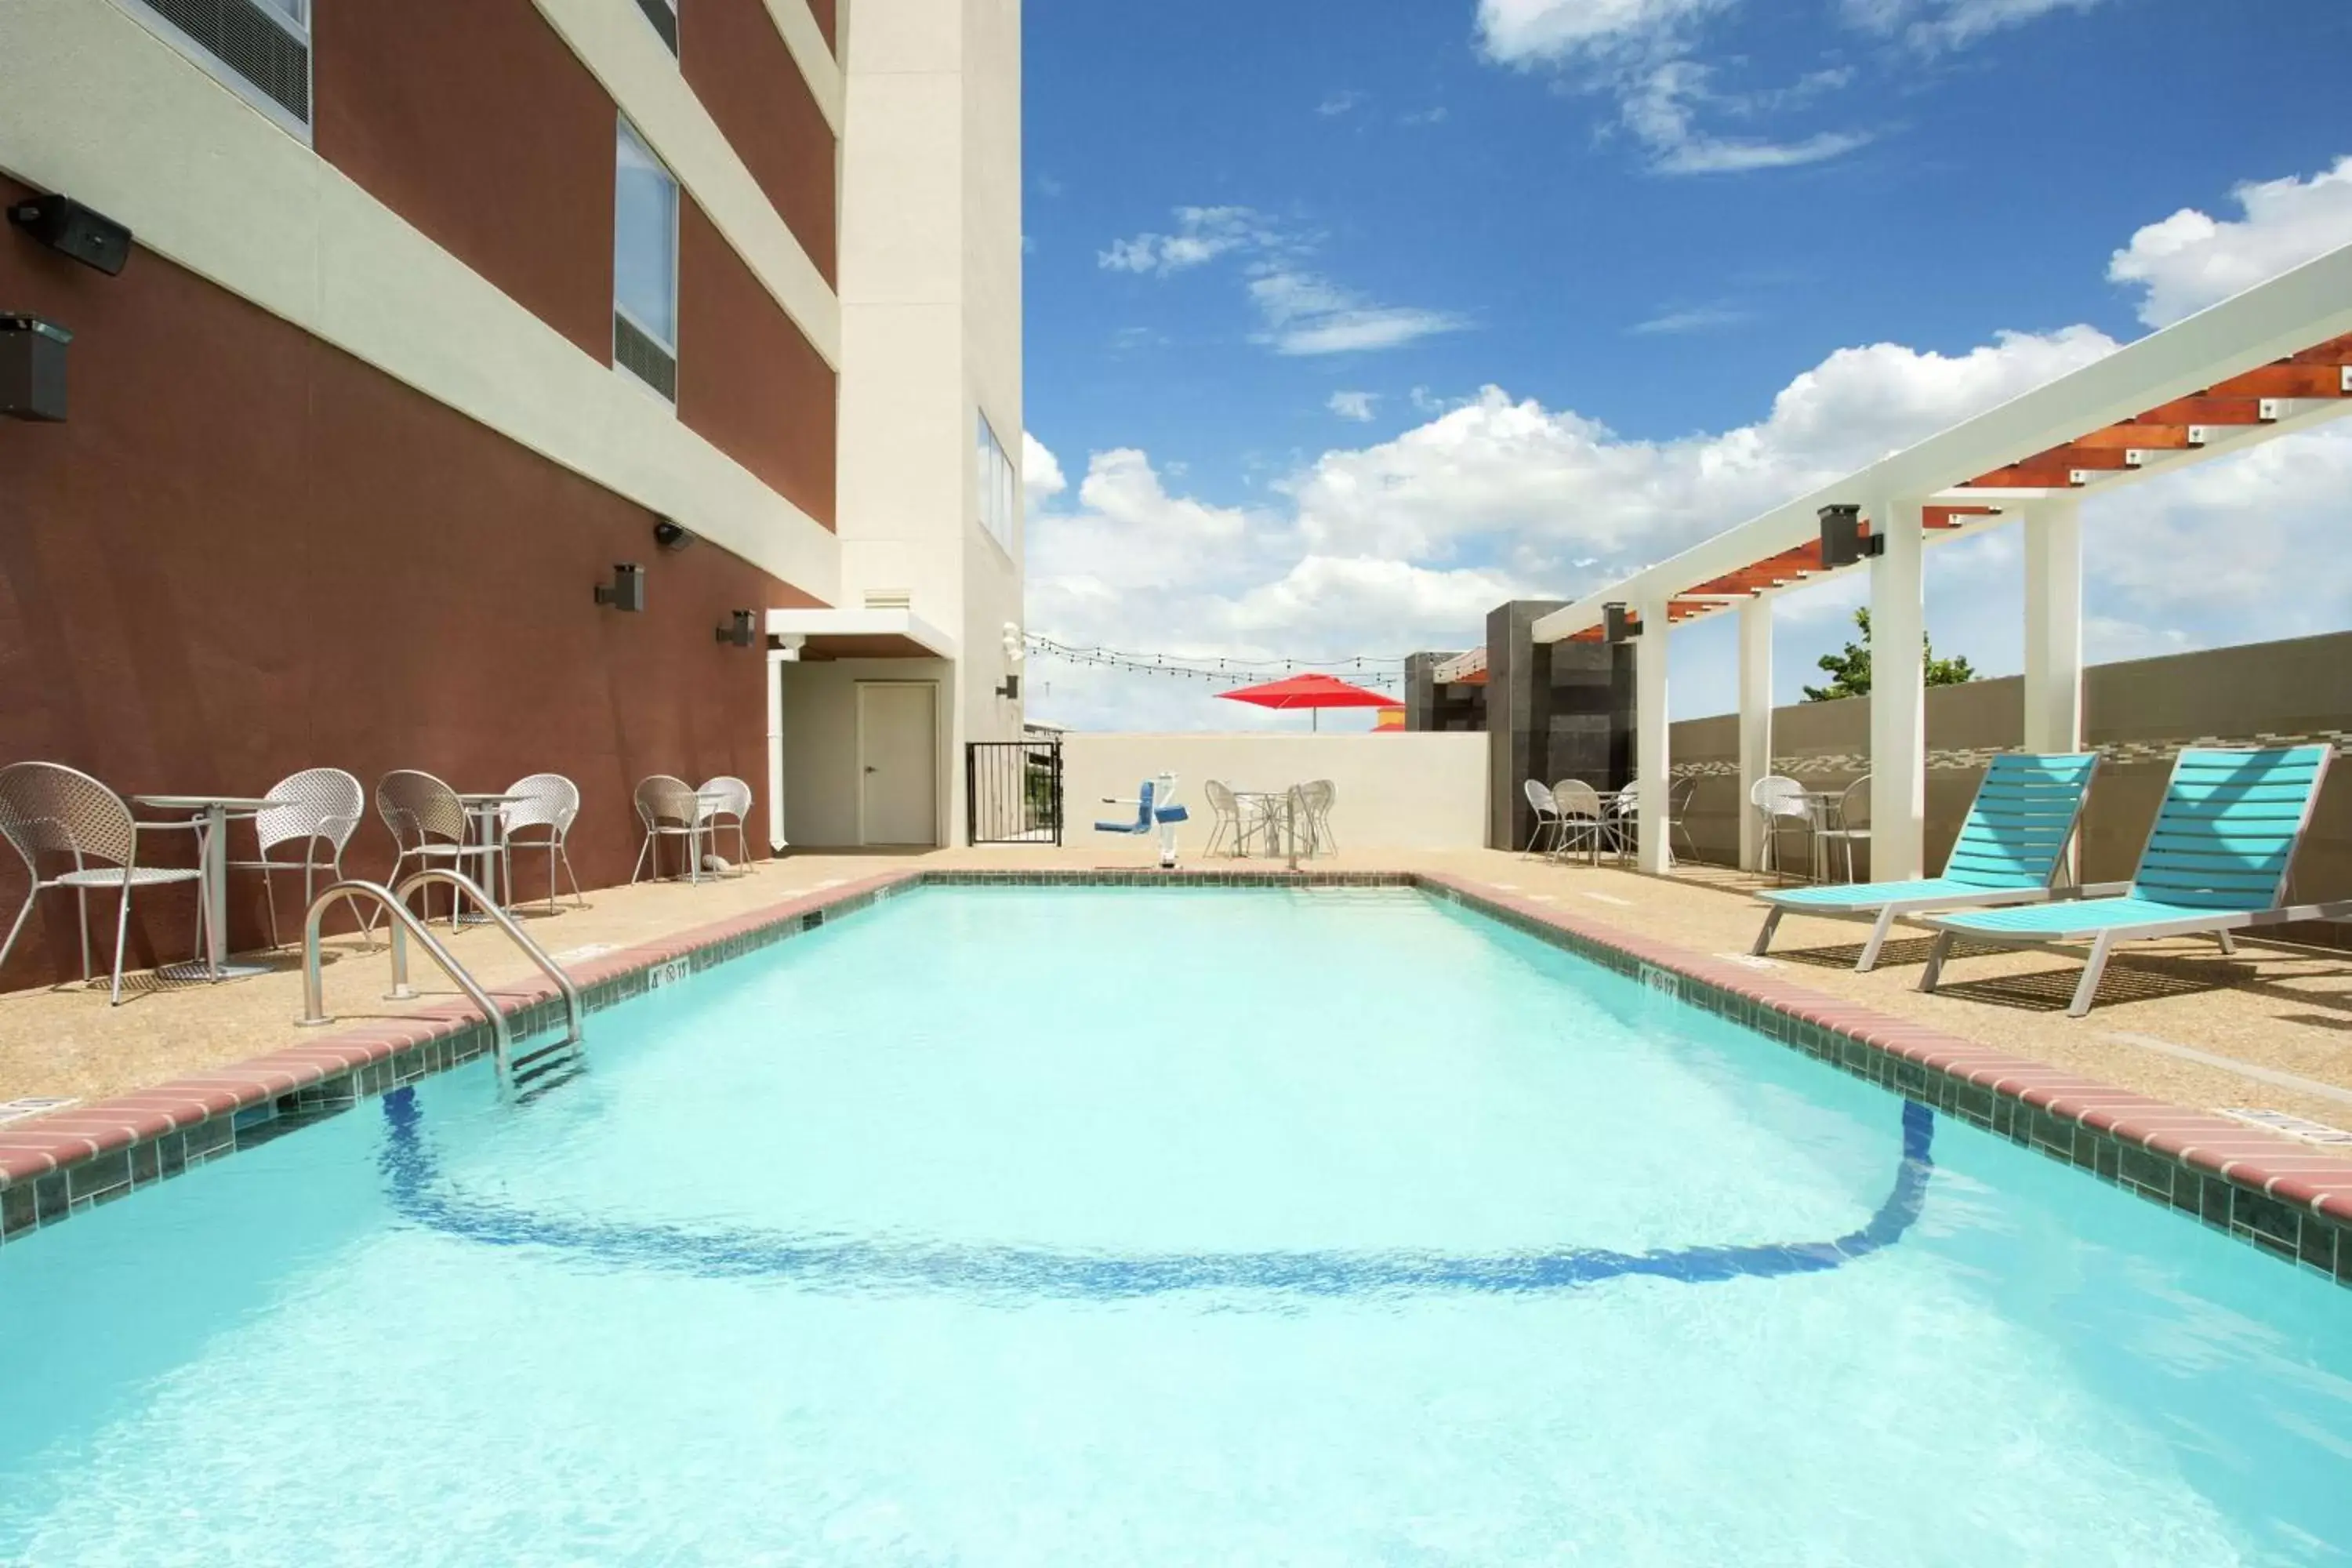 Pool view, Swimming Pool in Home2 Suites by Hilton San Antonio Airport, TX